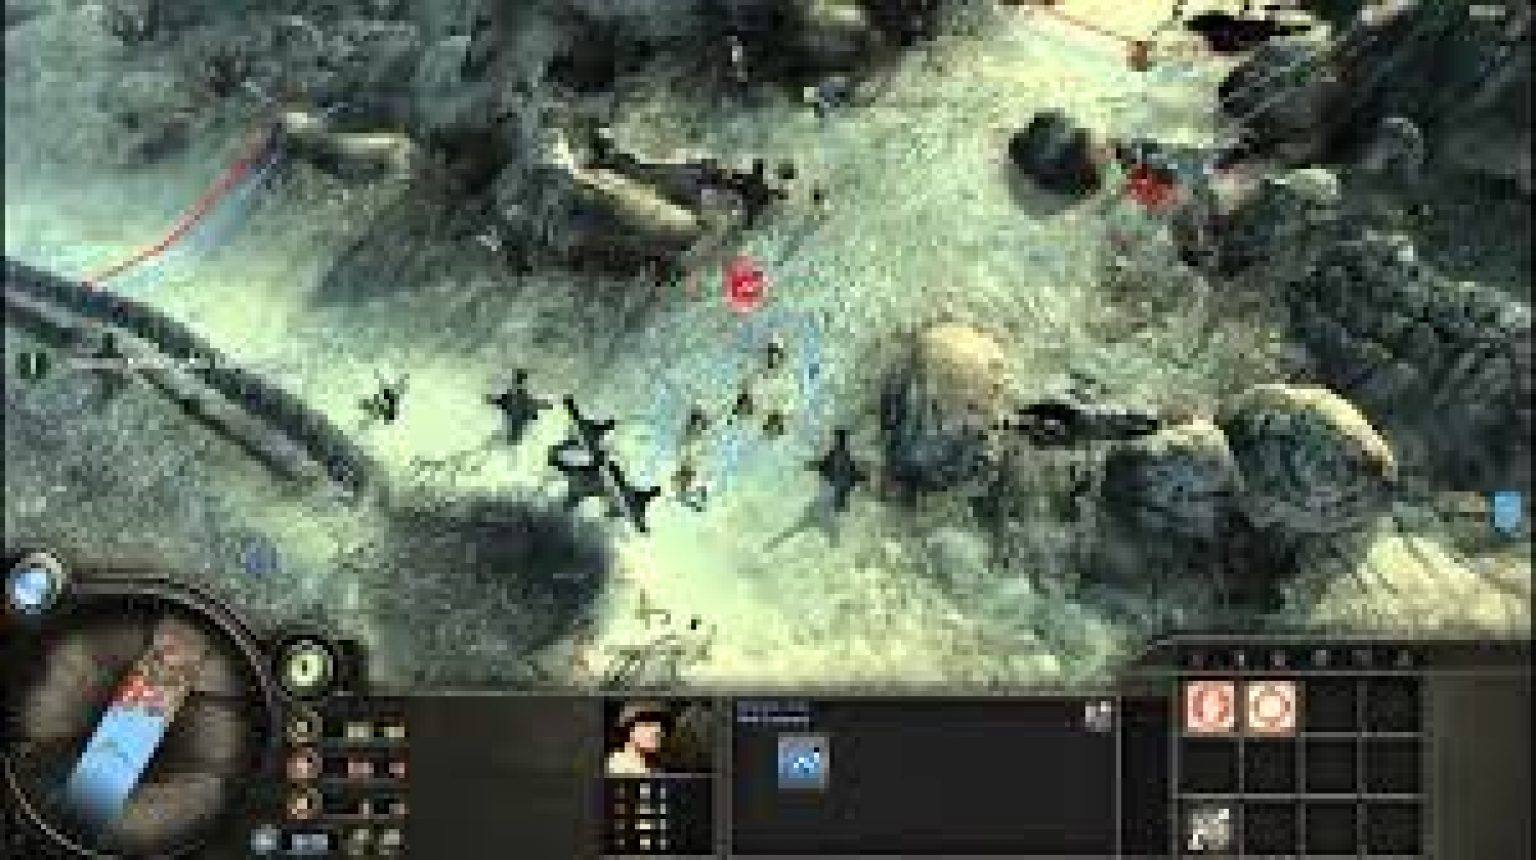 download company of heroes 1 free pc